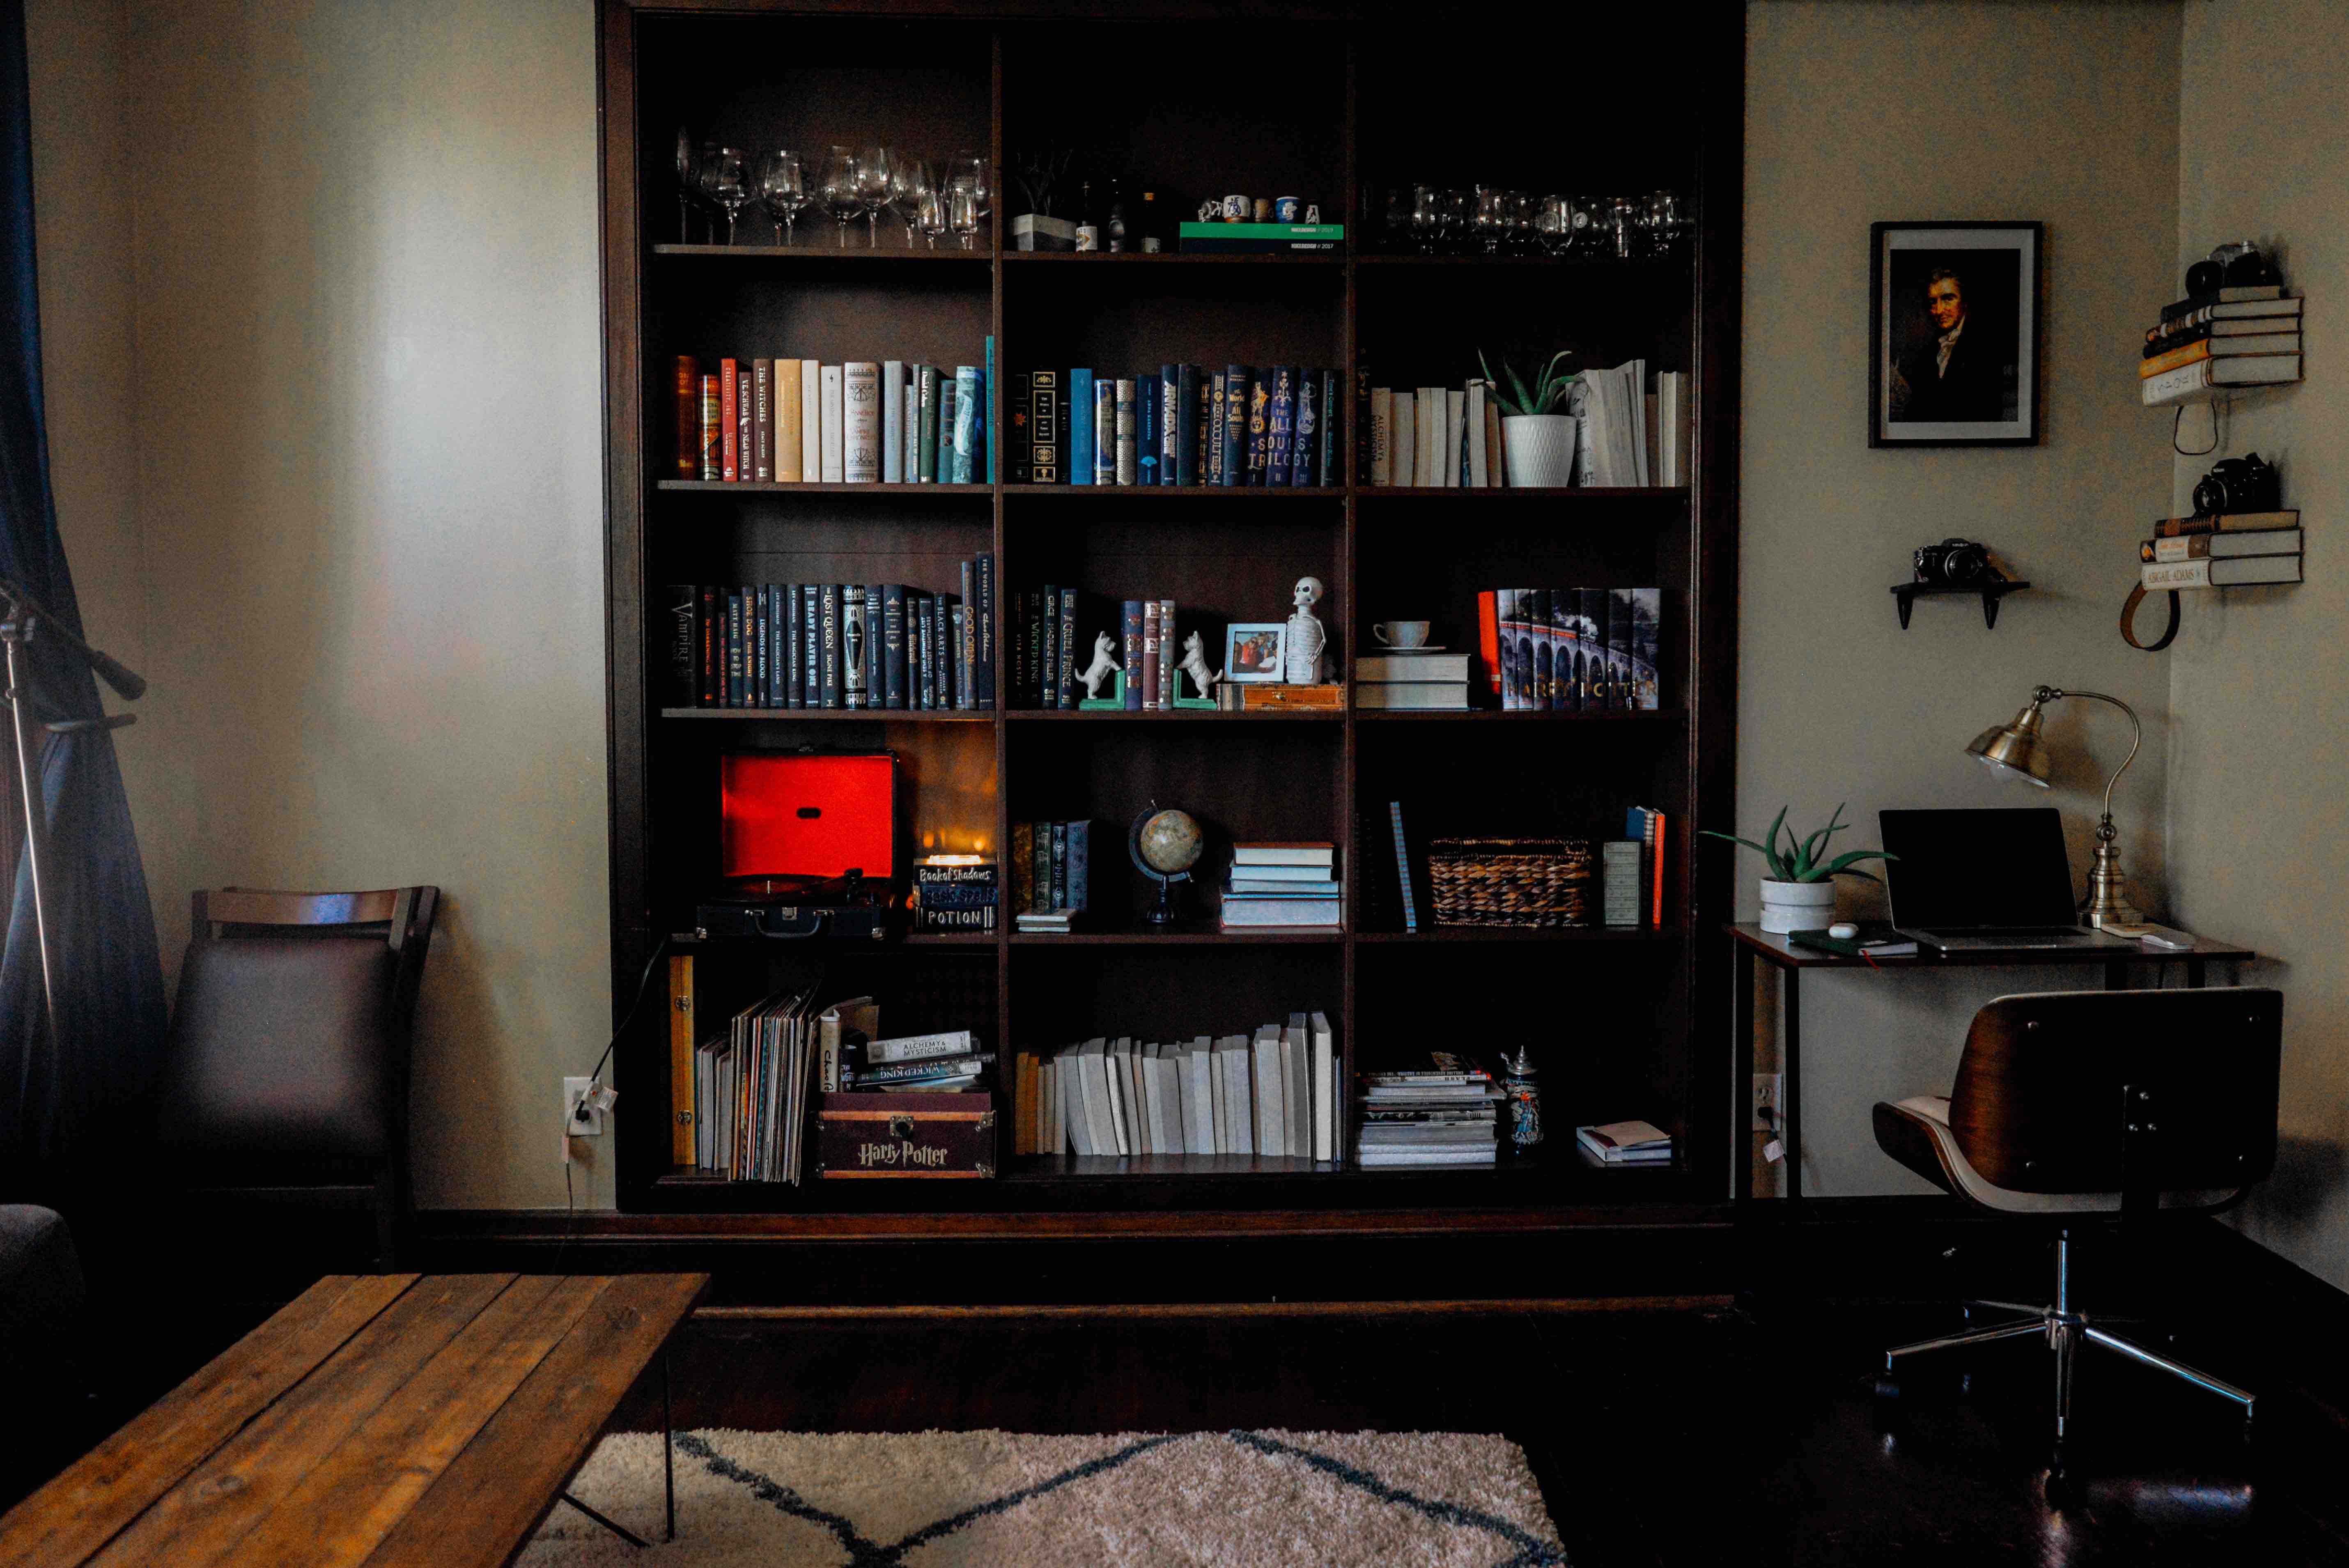 Photo of a bookshelf, styled for inspiration